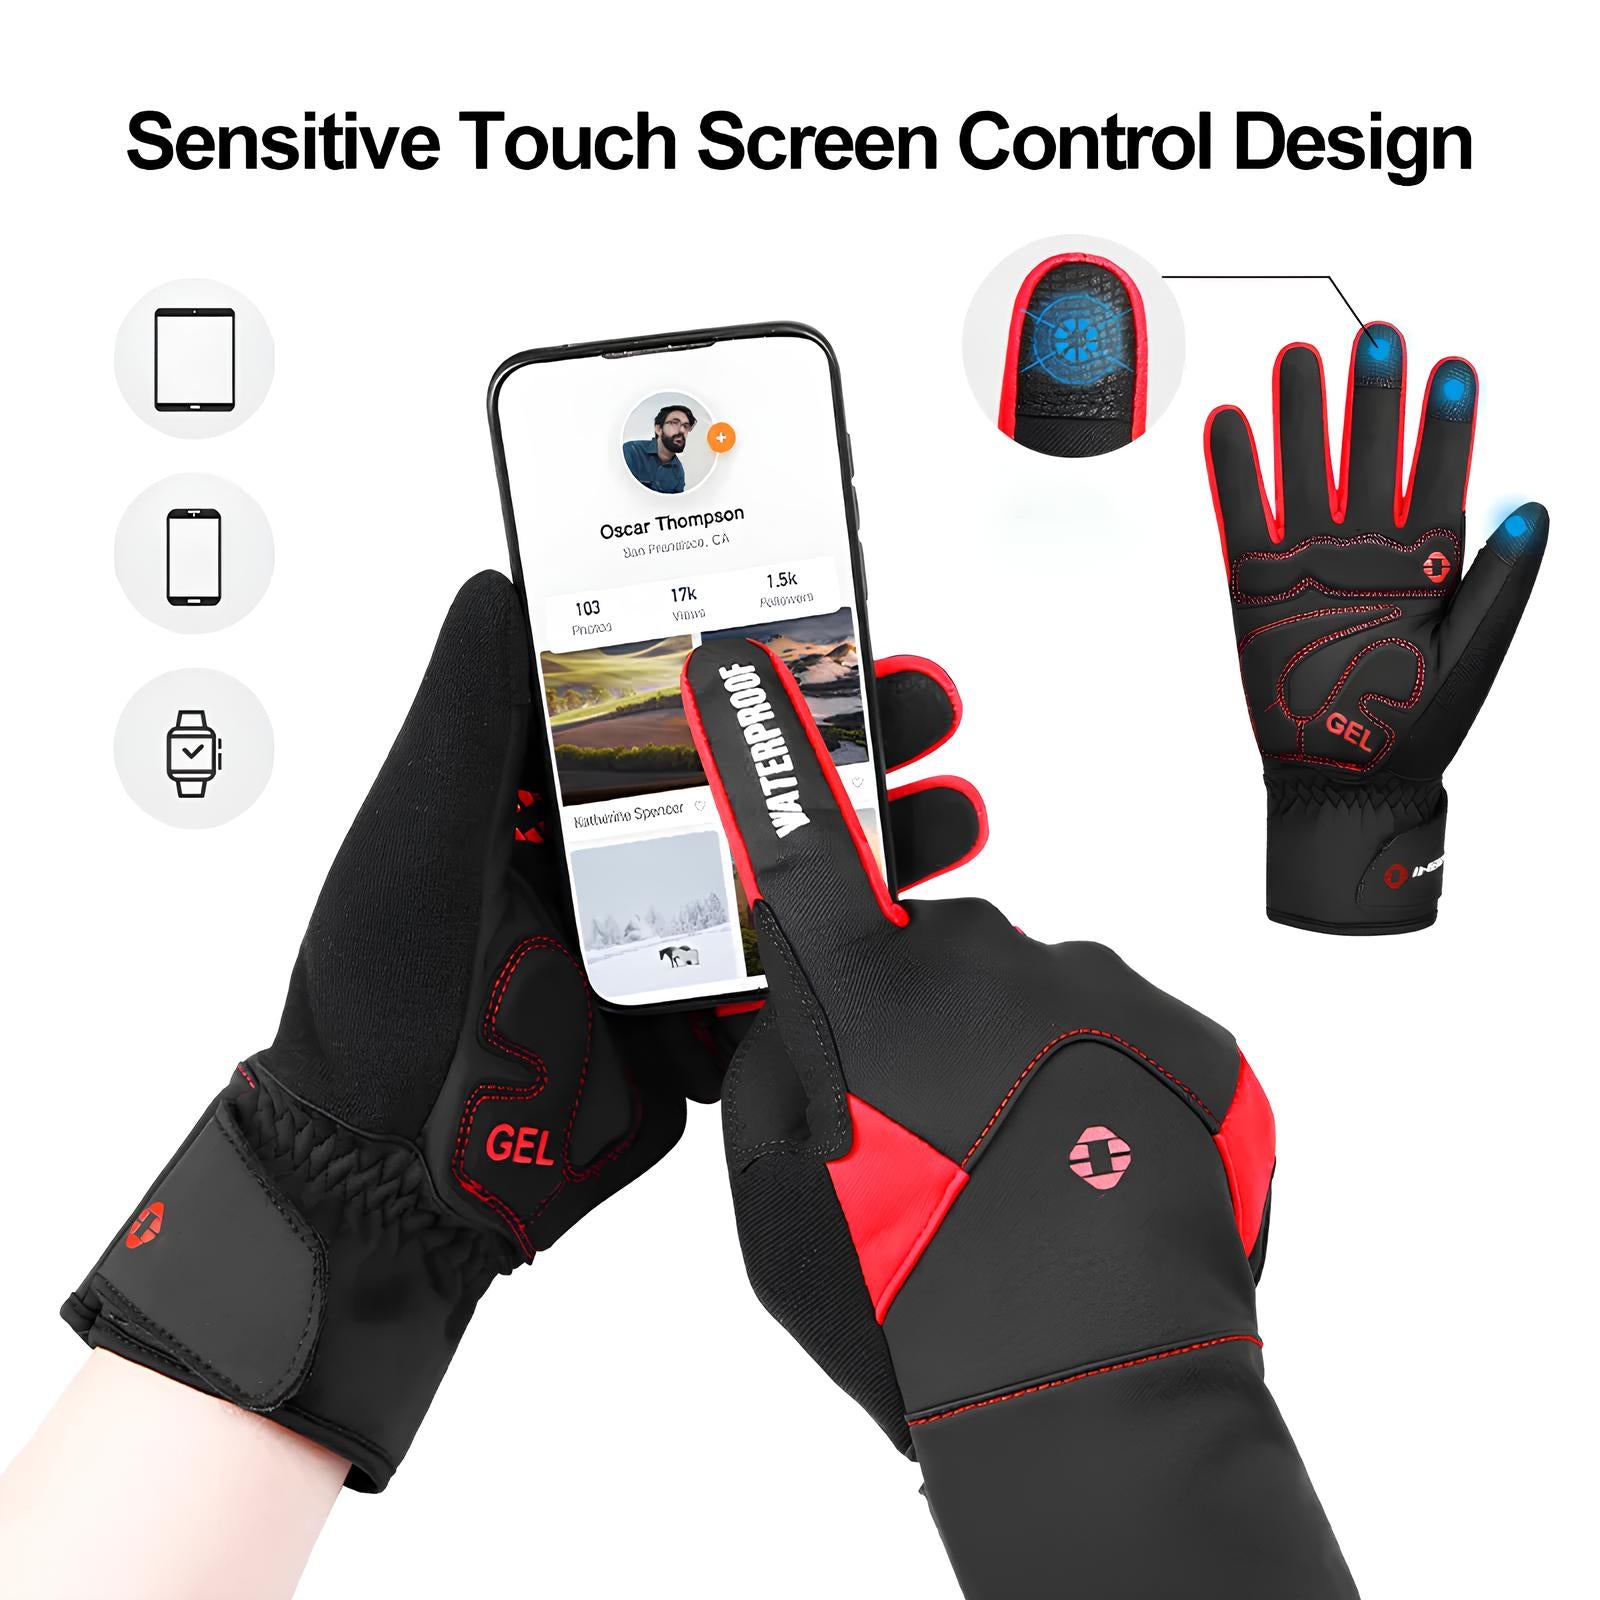 Touch-Screen Bicycle Gloves for Sale at Viribus Bikes